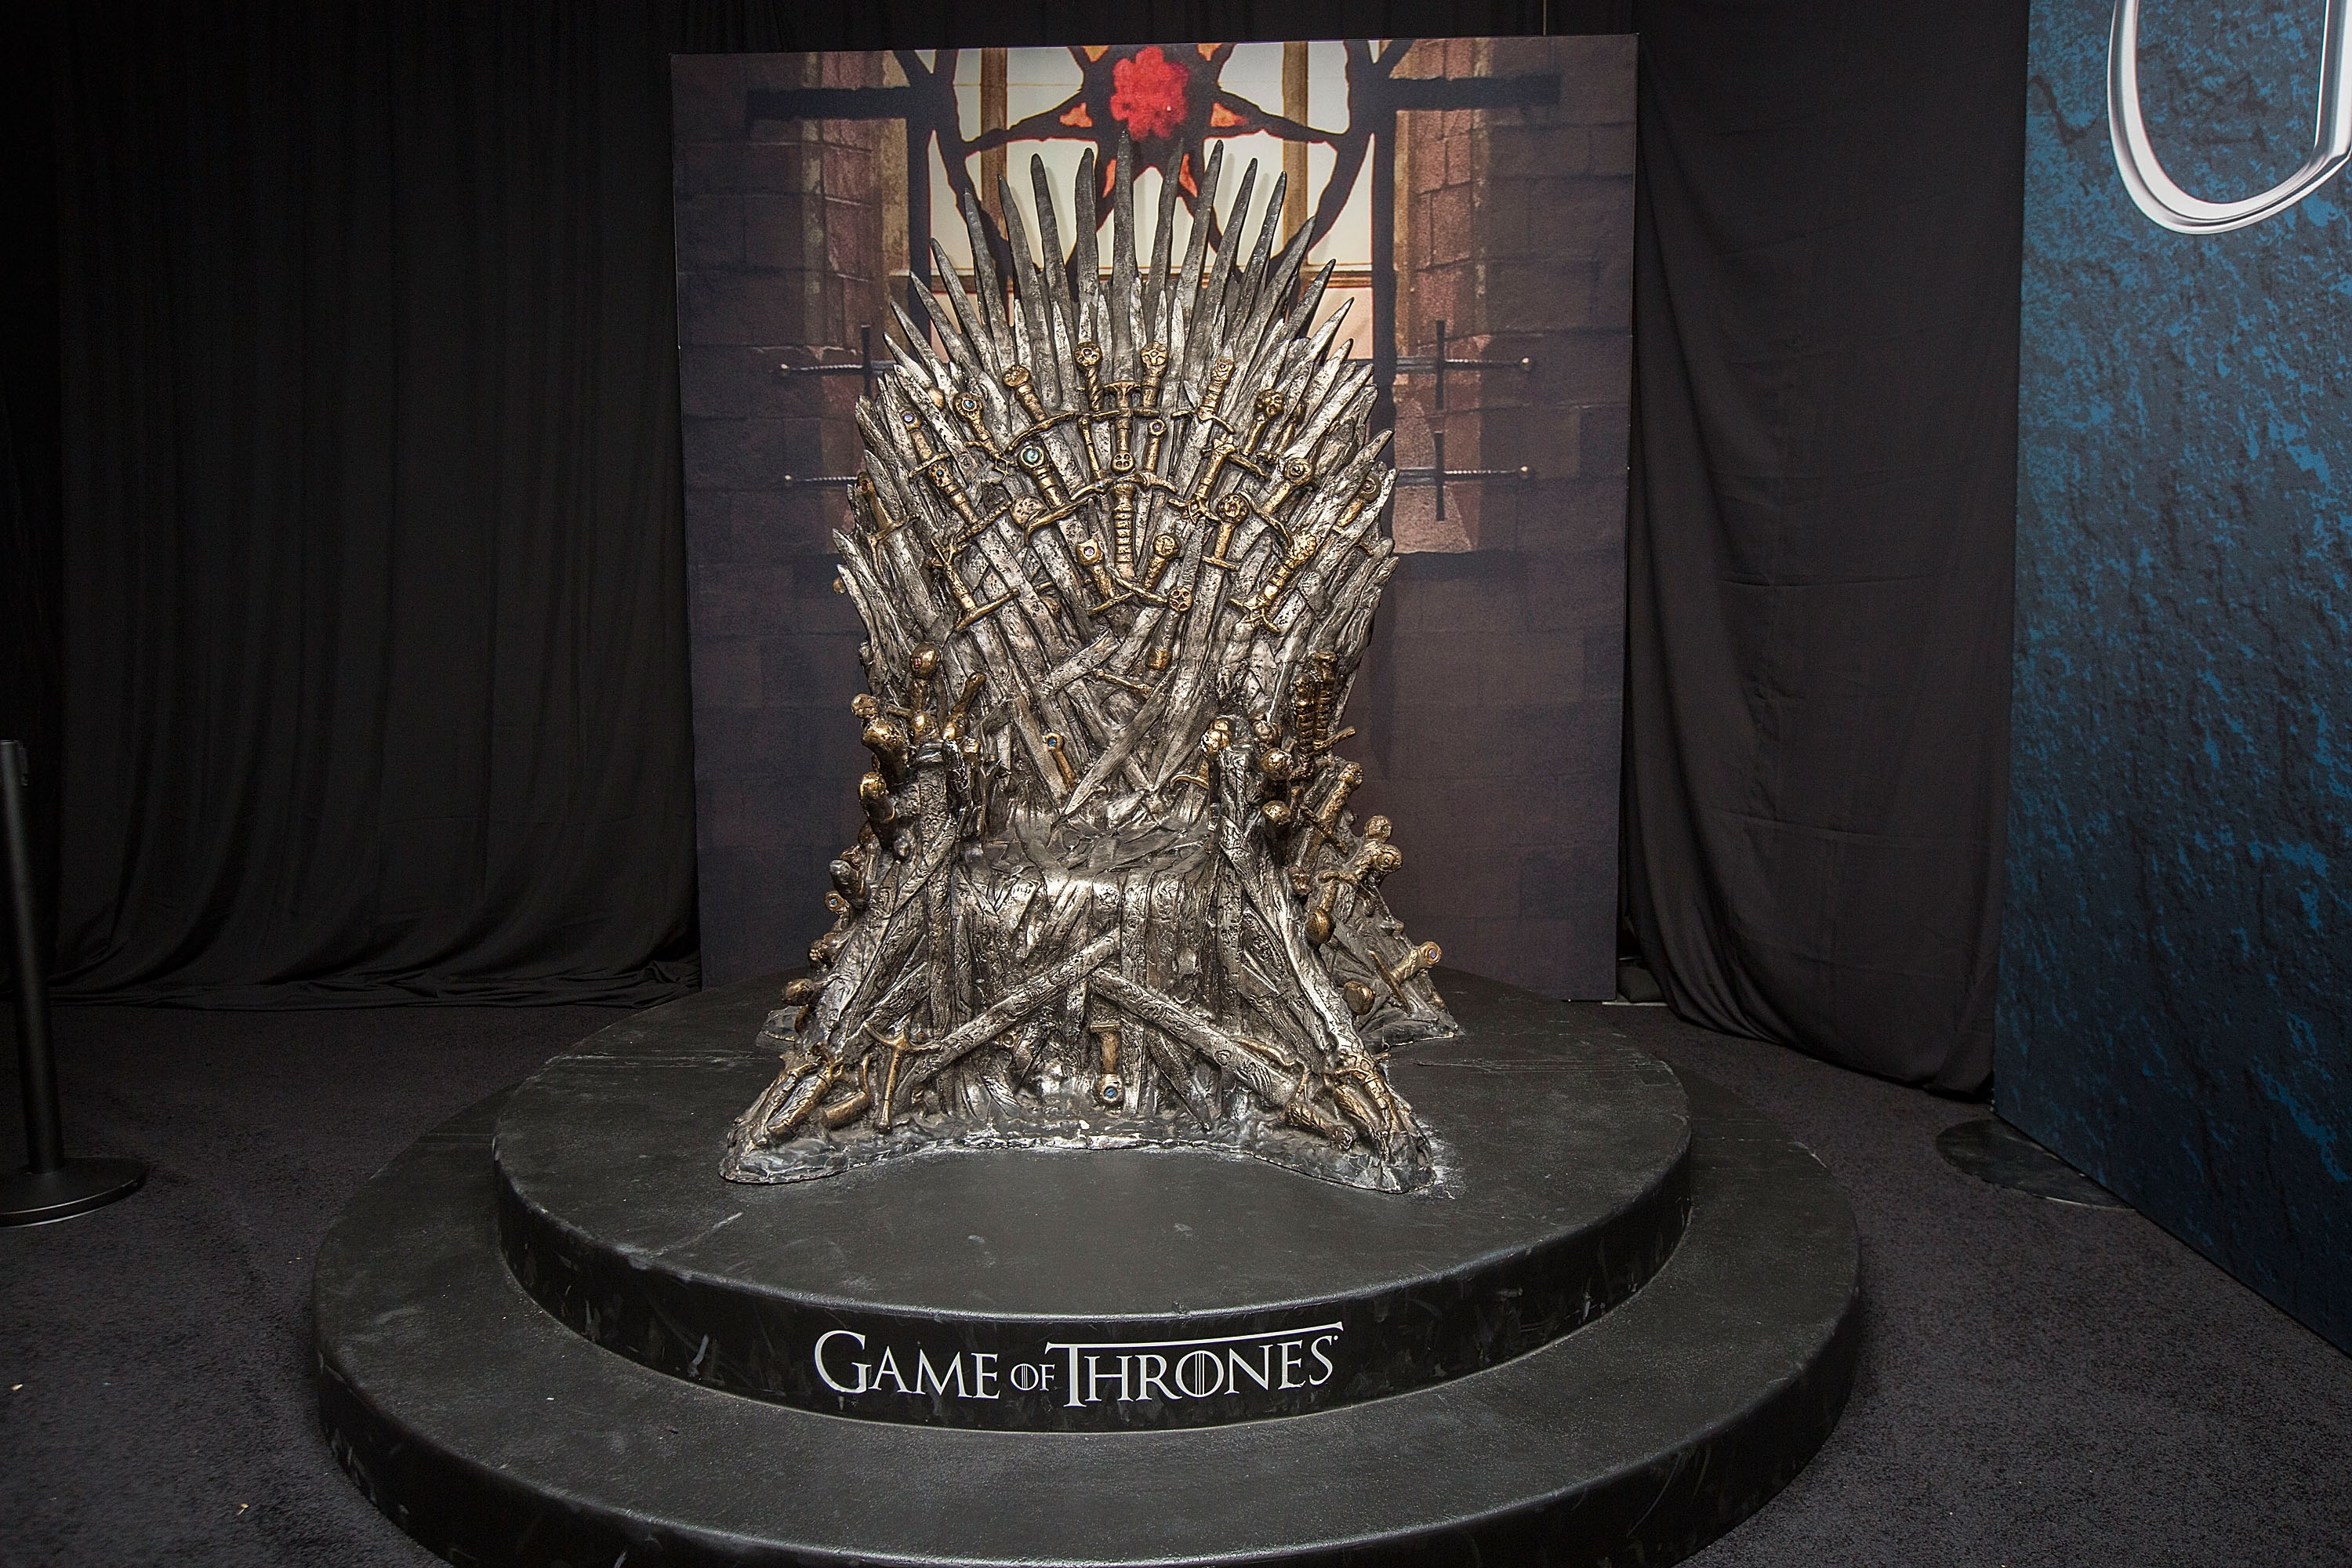 The Iron Throne display at the Hall of Faces presented by the HBO hit series "Game of Thrones" at Comic-Con International - Day 3 on July 22, 2016 in San Diego, California. (Daniel Knighton&mdash;FilmMagic/Getty Images)